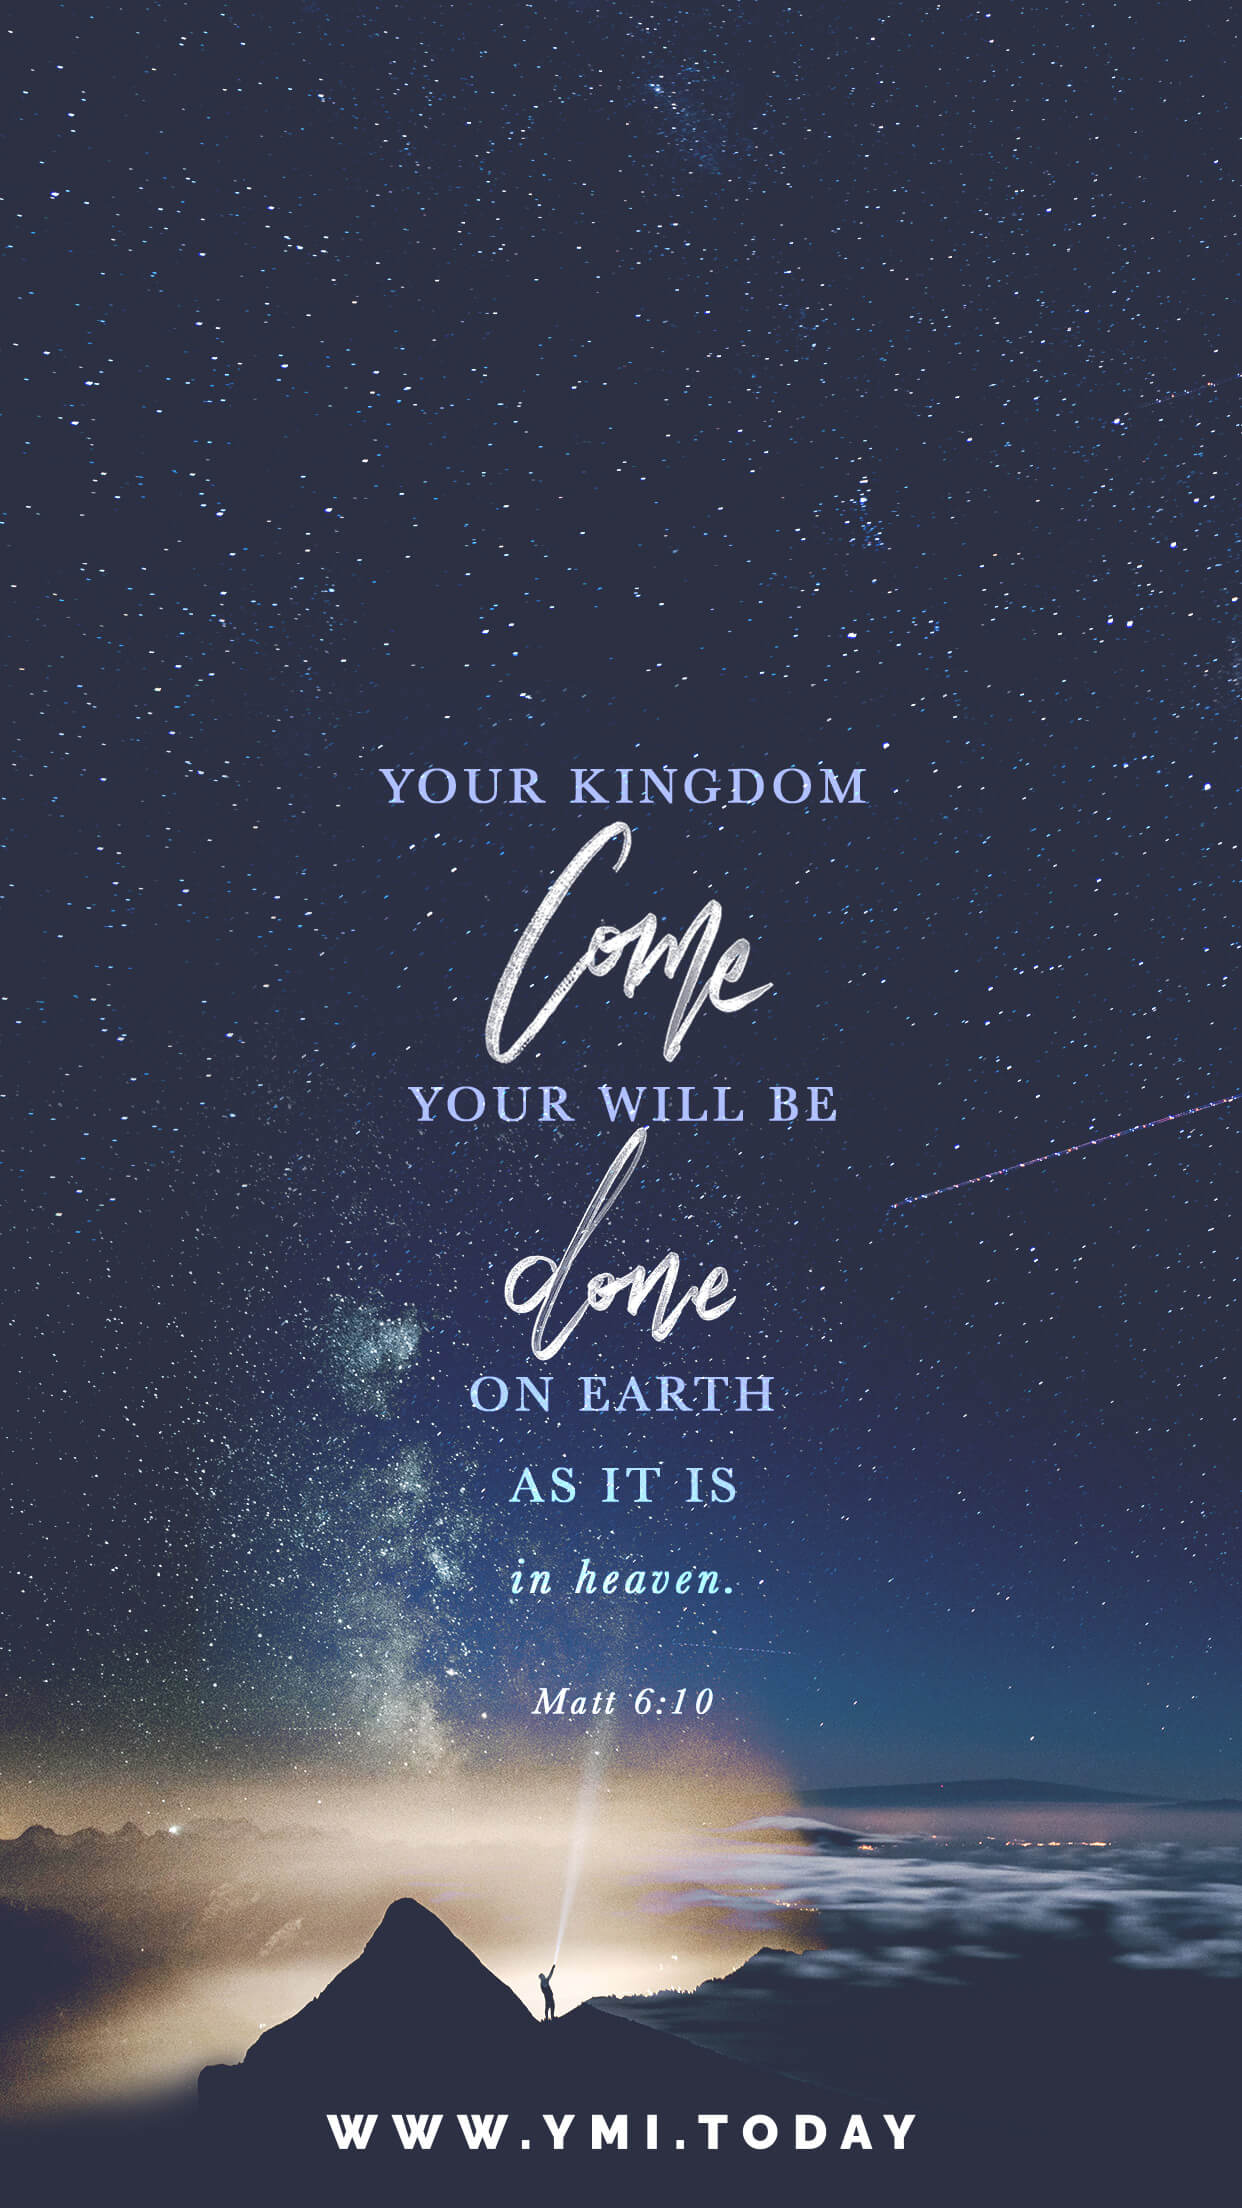 YMI May 2017 Phone Lockscreen - Your kingdom come. Your will be done, on earth as it is in heaven. - Matthew 6:10